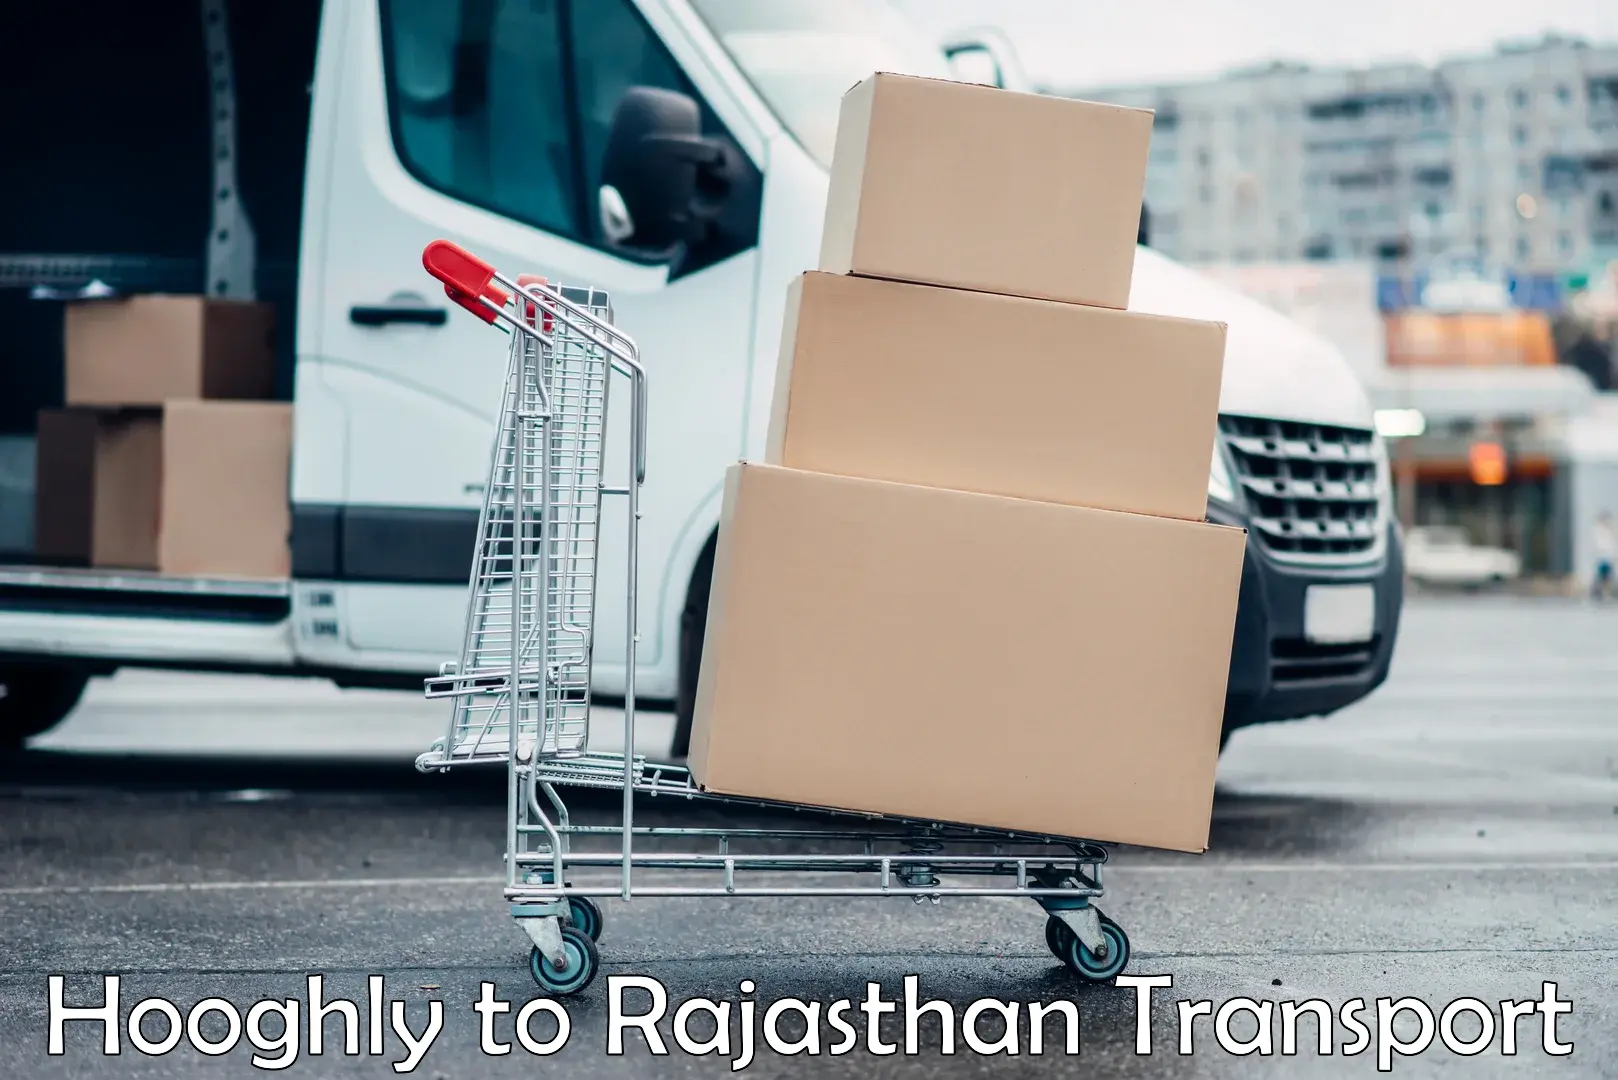 Parcel transport services Hooghly to Bhinder